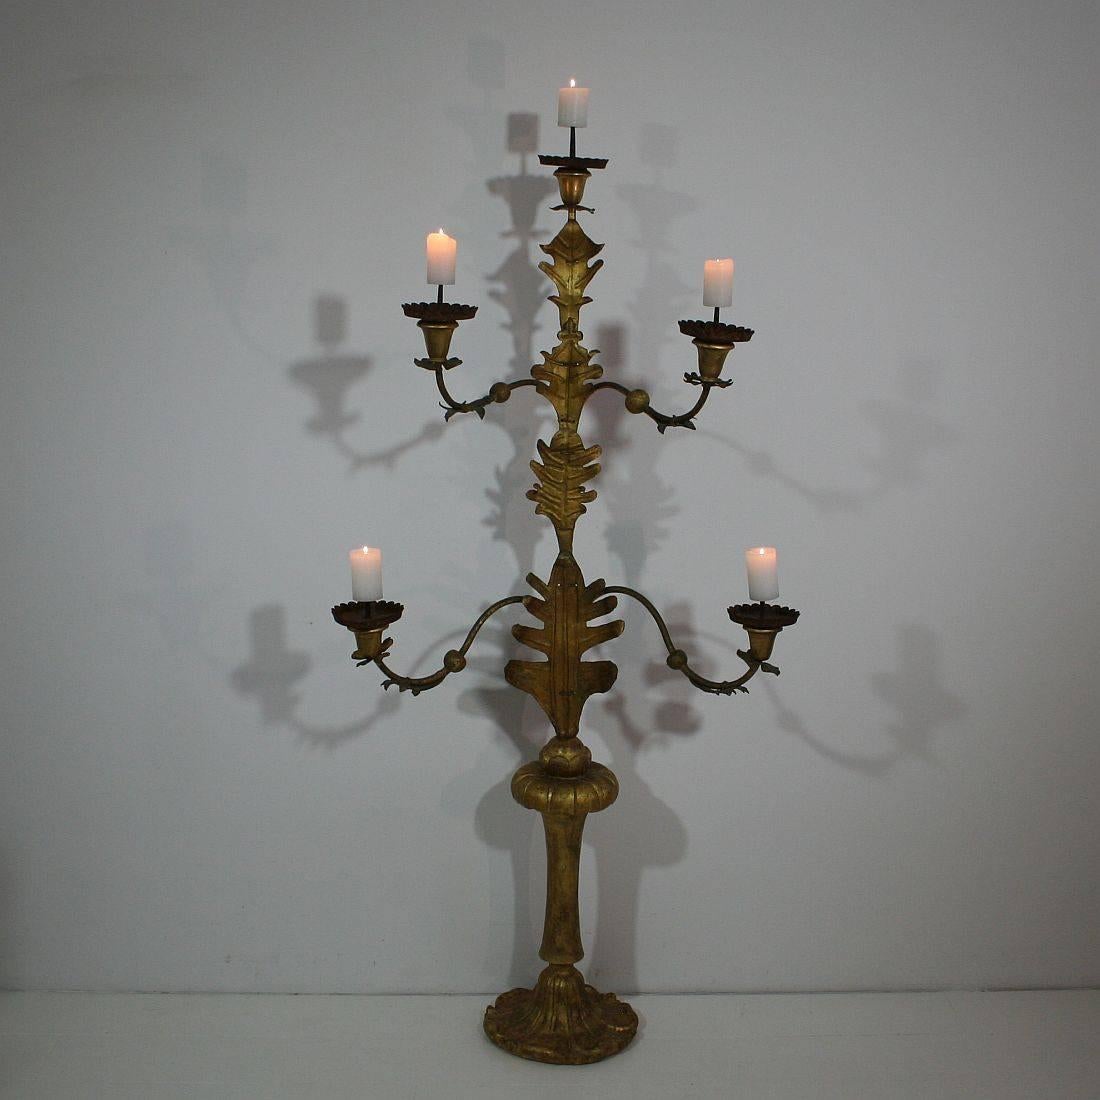 Unique and very large Baroque hand-forged iron candleholder on a wooden base.
Italy, circa 1750
Weathered, small losses.
More pictures are available on request.